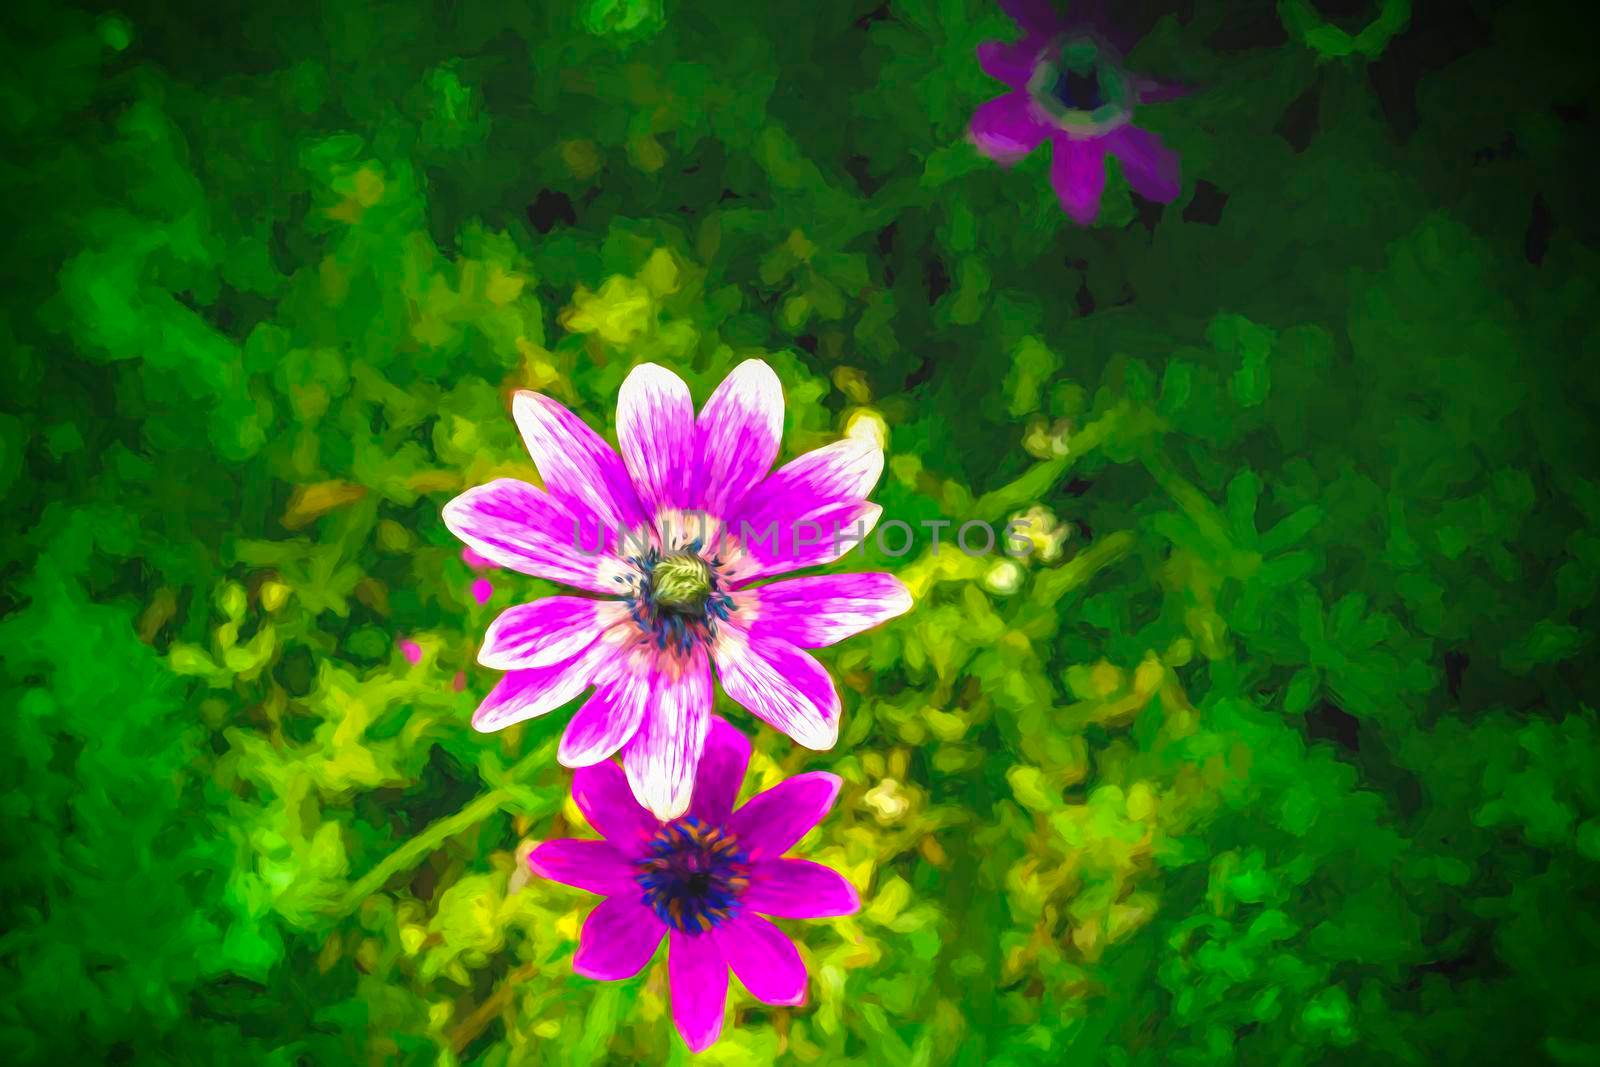 An Illustration of a pink white flower. Digitally painted.